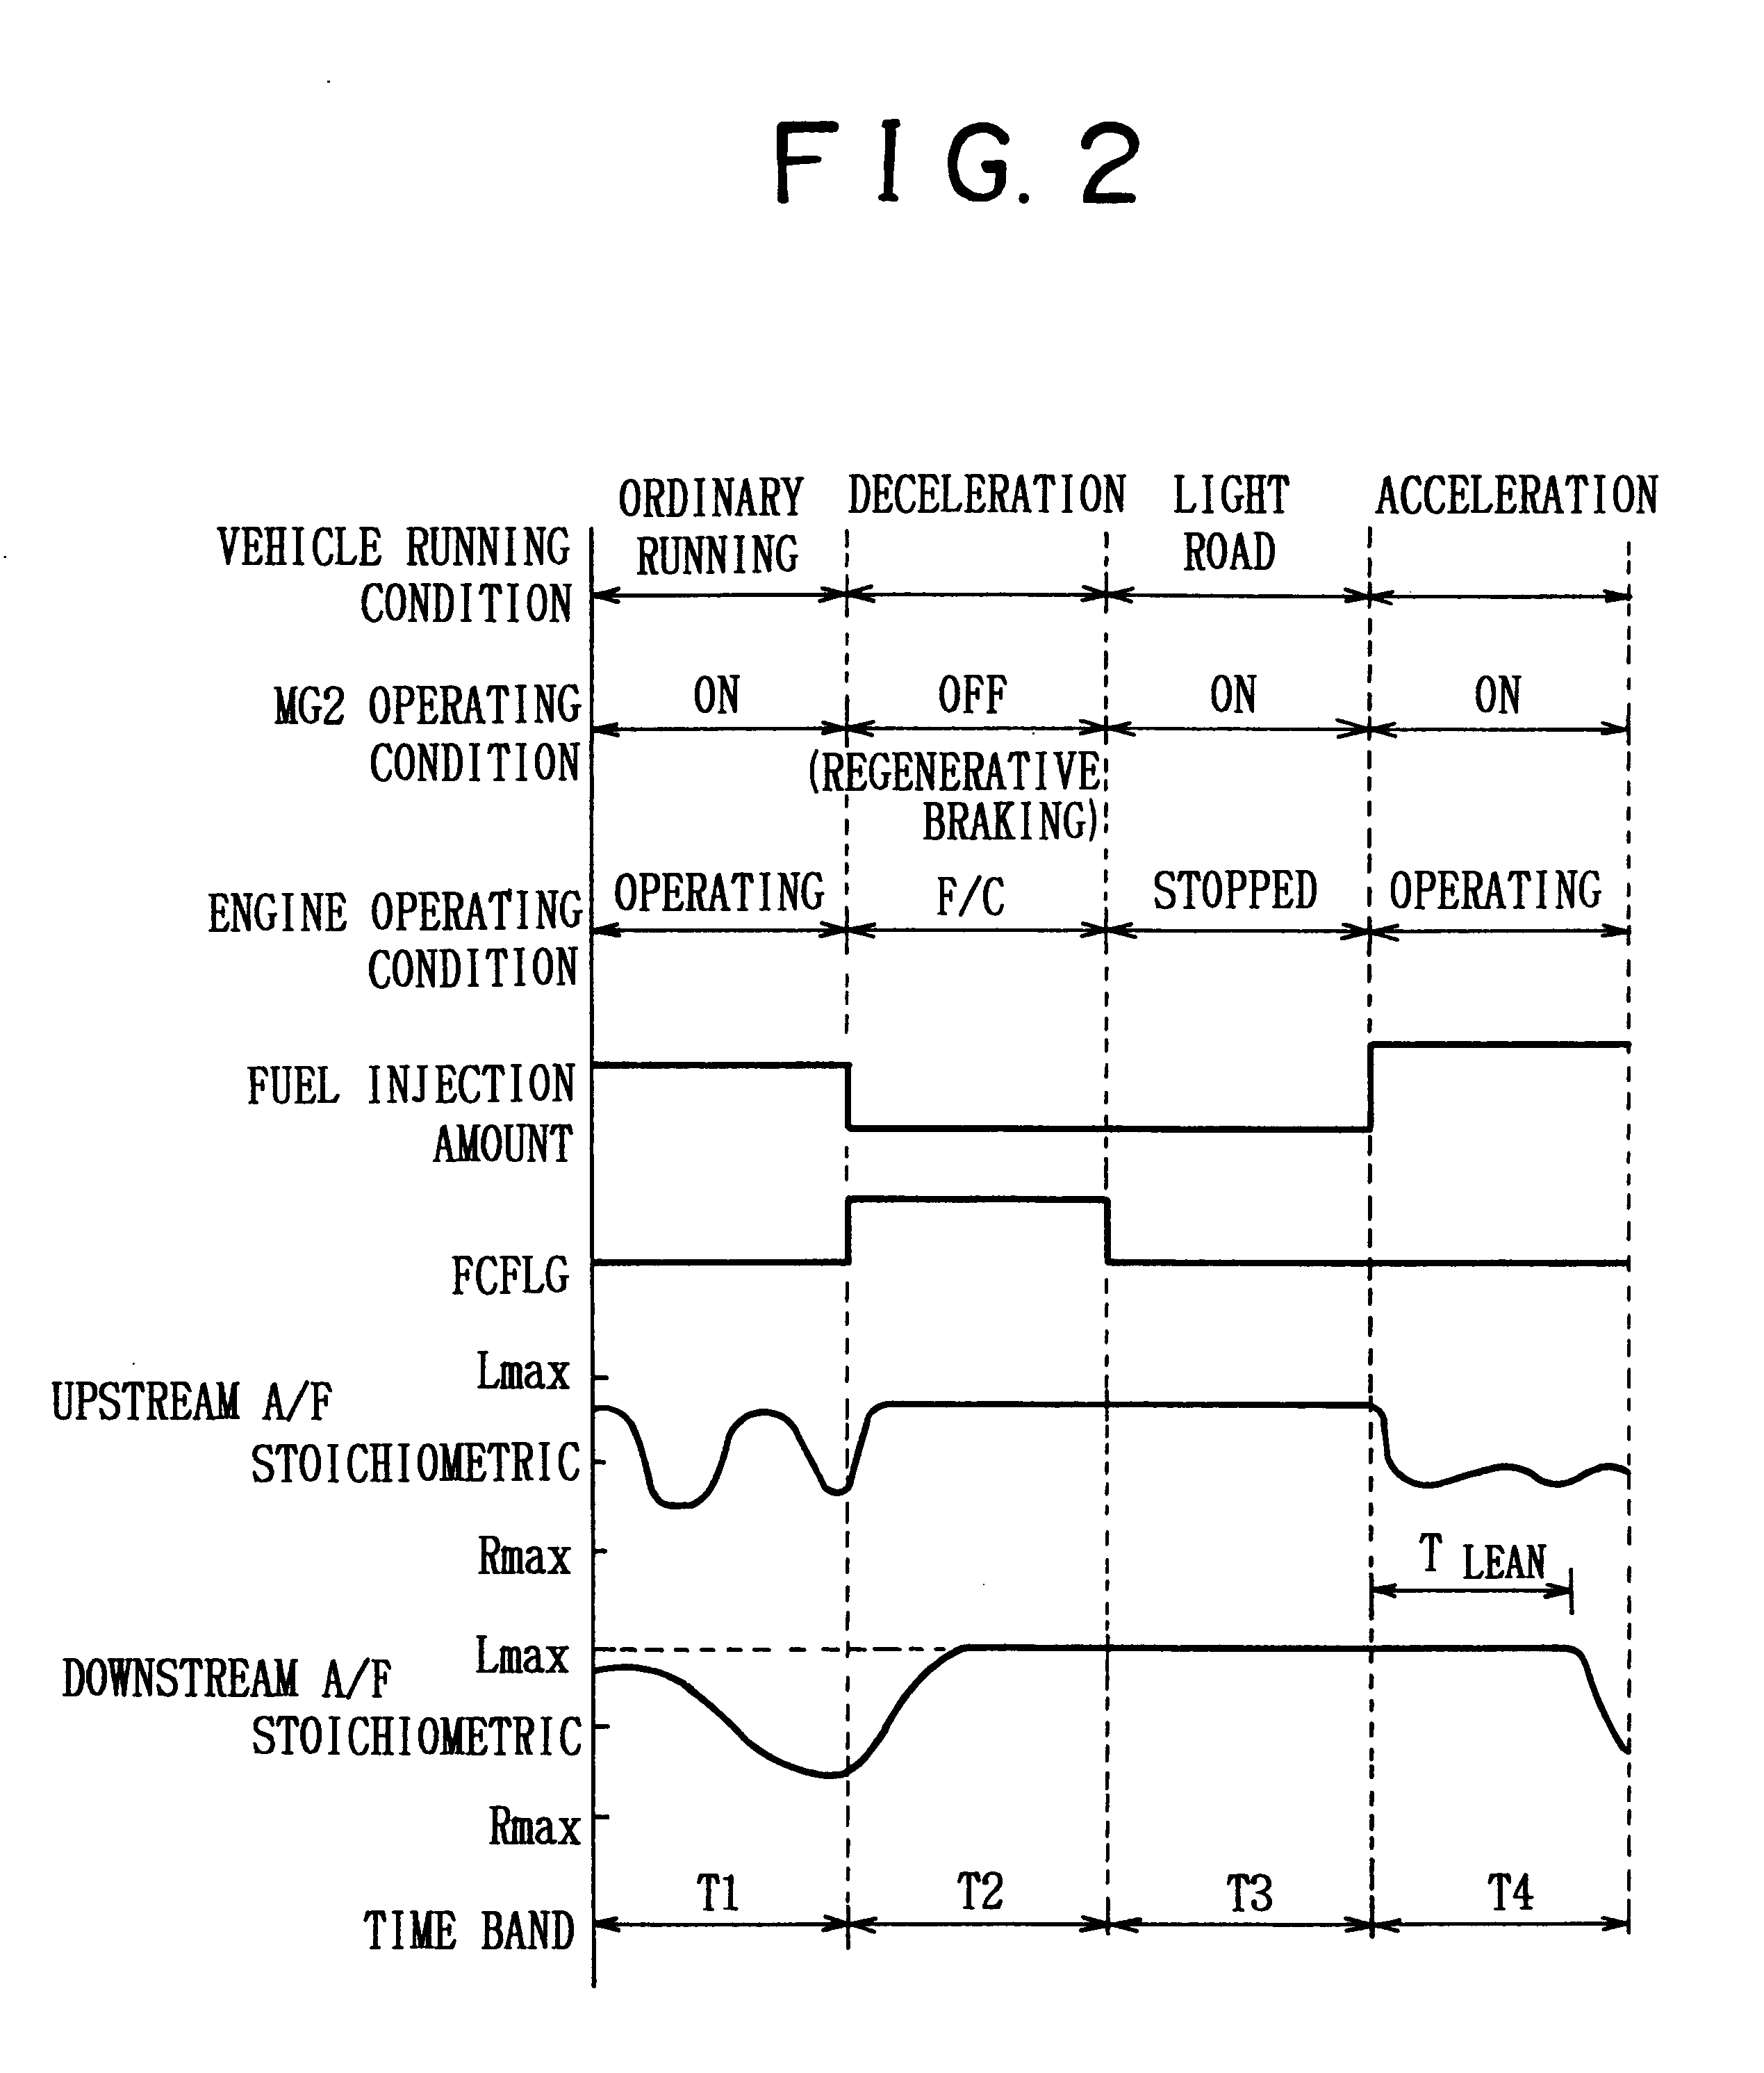 Catalyst deterioration detecting apparatus for internal combustion engine